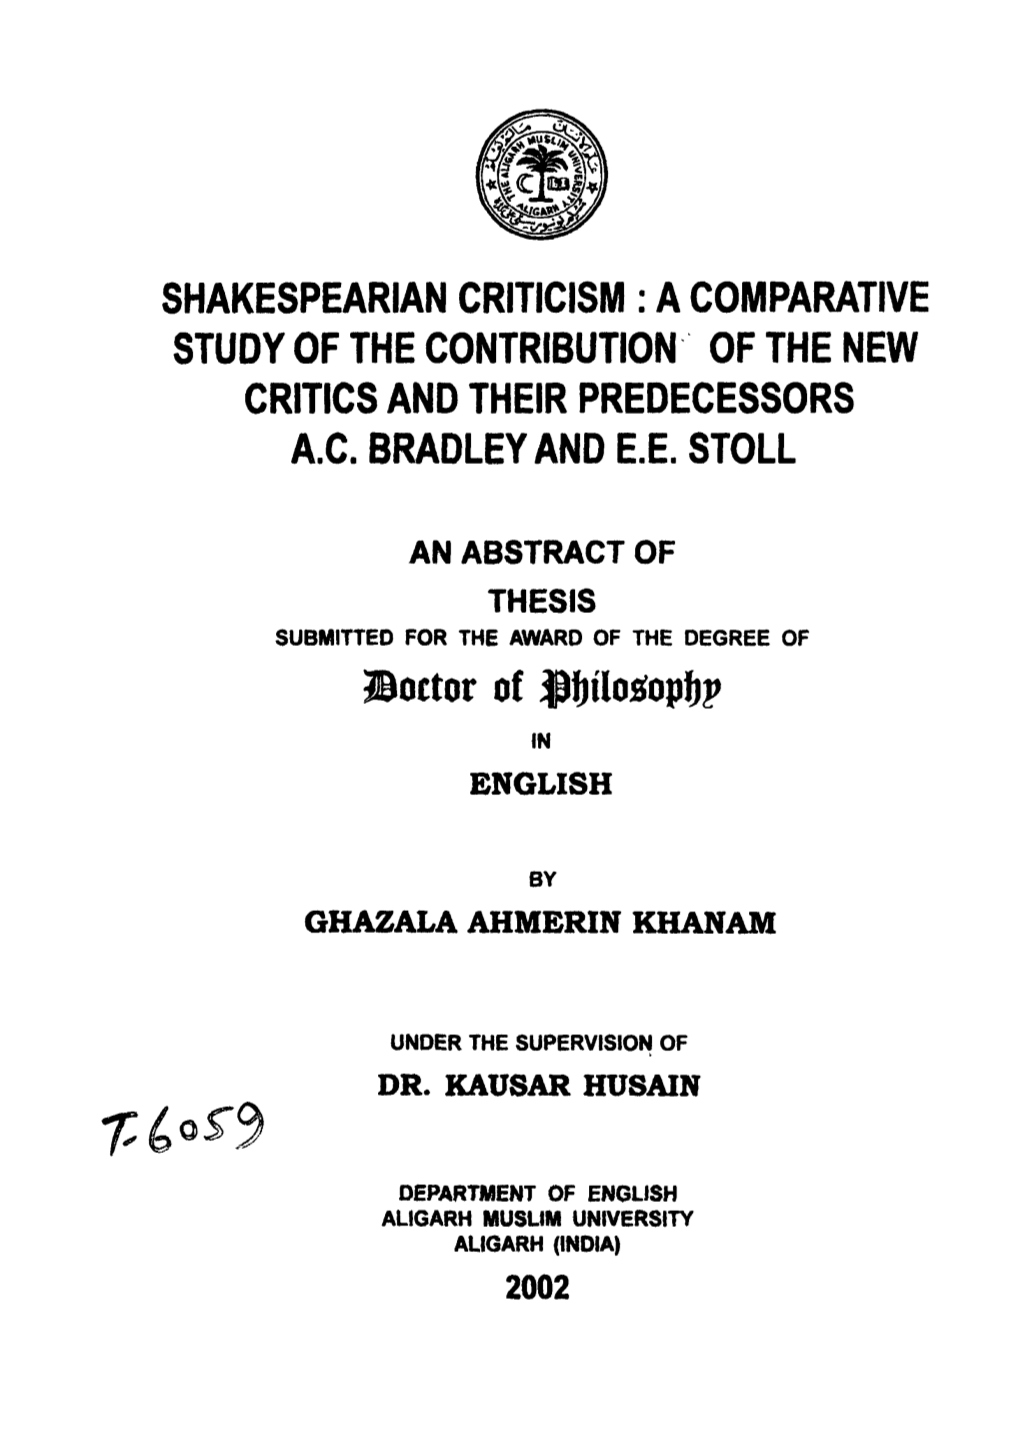 A Comparative Study of the Contribution of the New Critics and Their Predecessors A.C